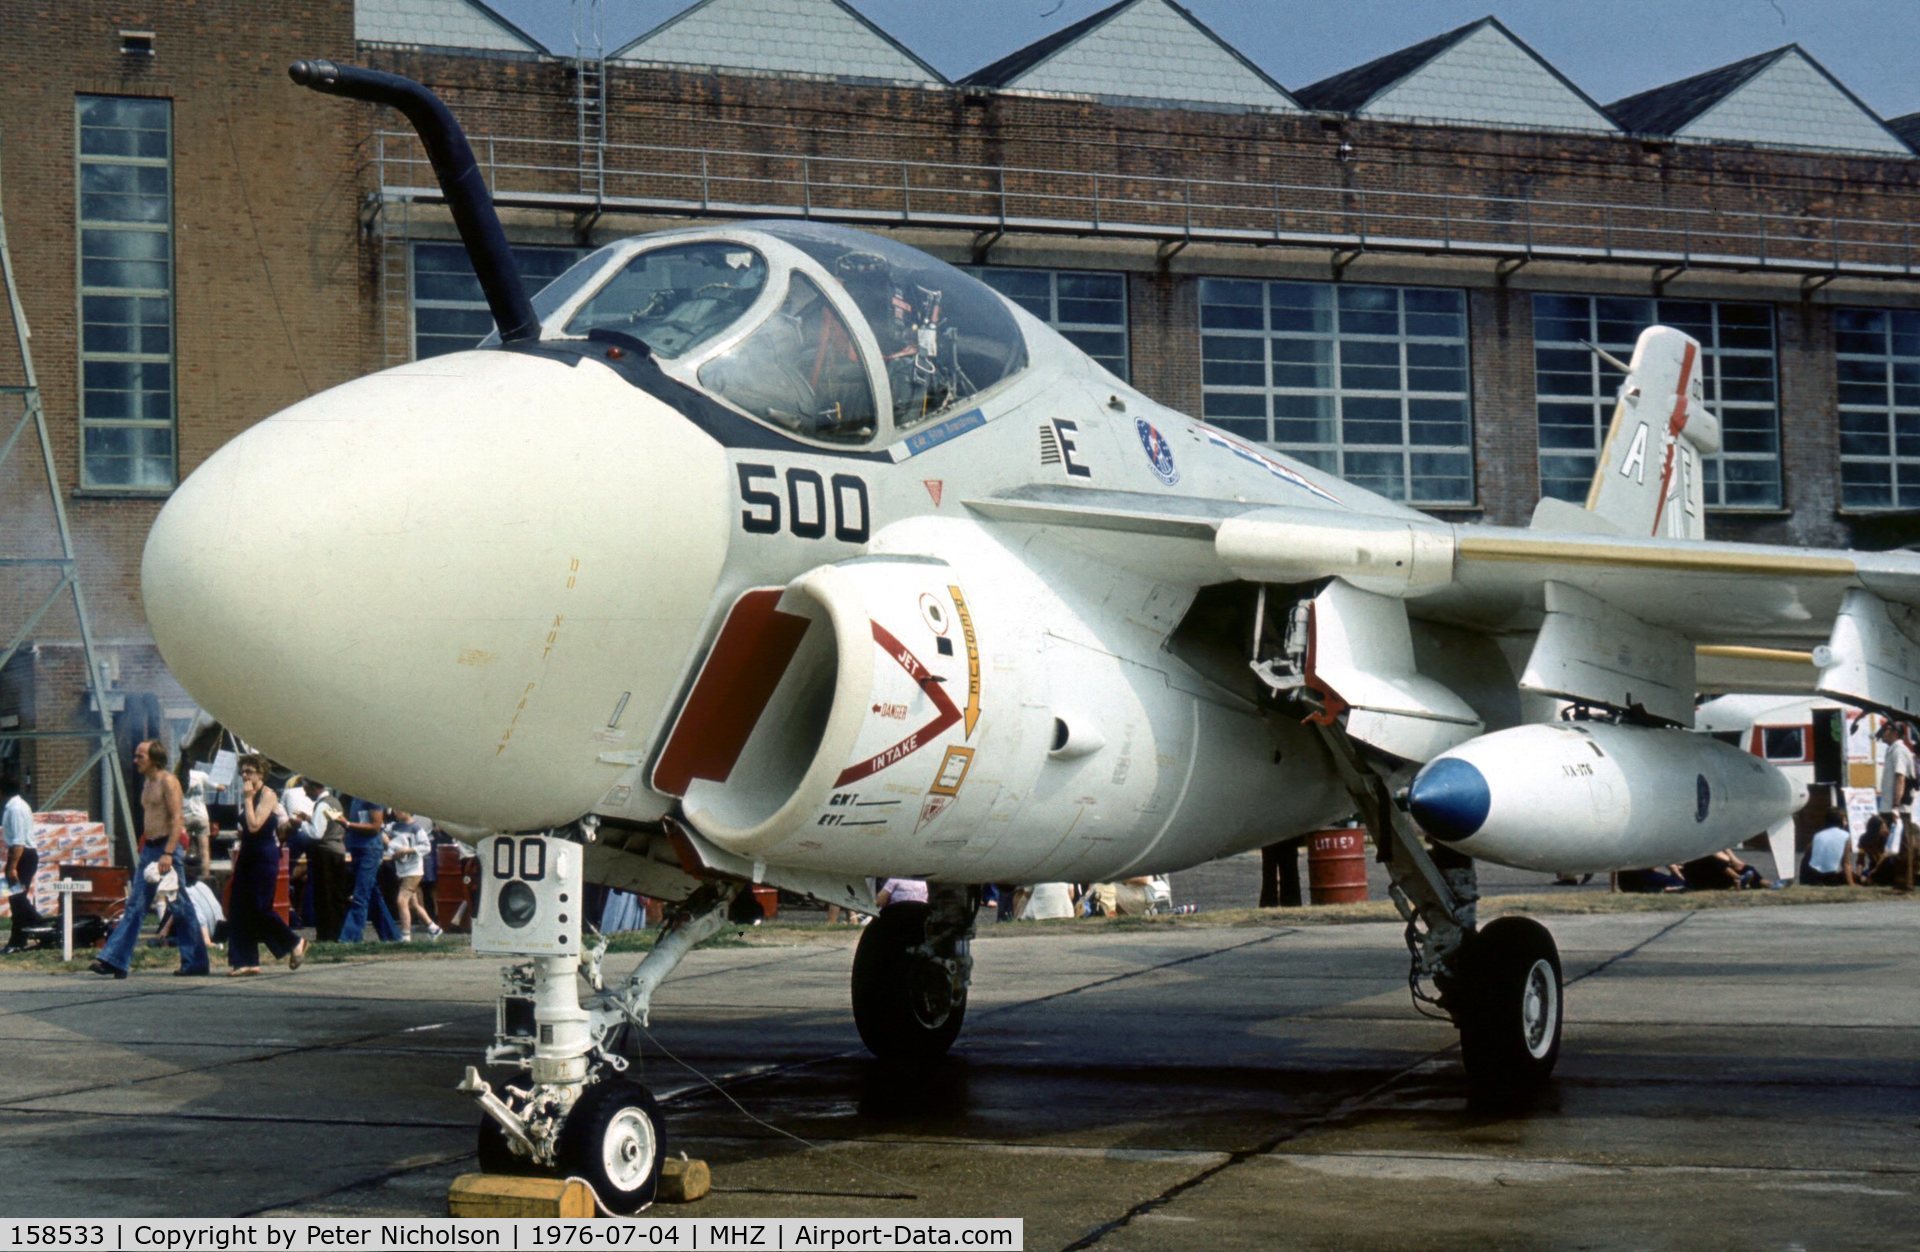 158533, Grumman A-6E Intruder C/N I-516, Another view of VA-176's Intruder on display at the 1976 Mildenhall Air Fete.